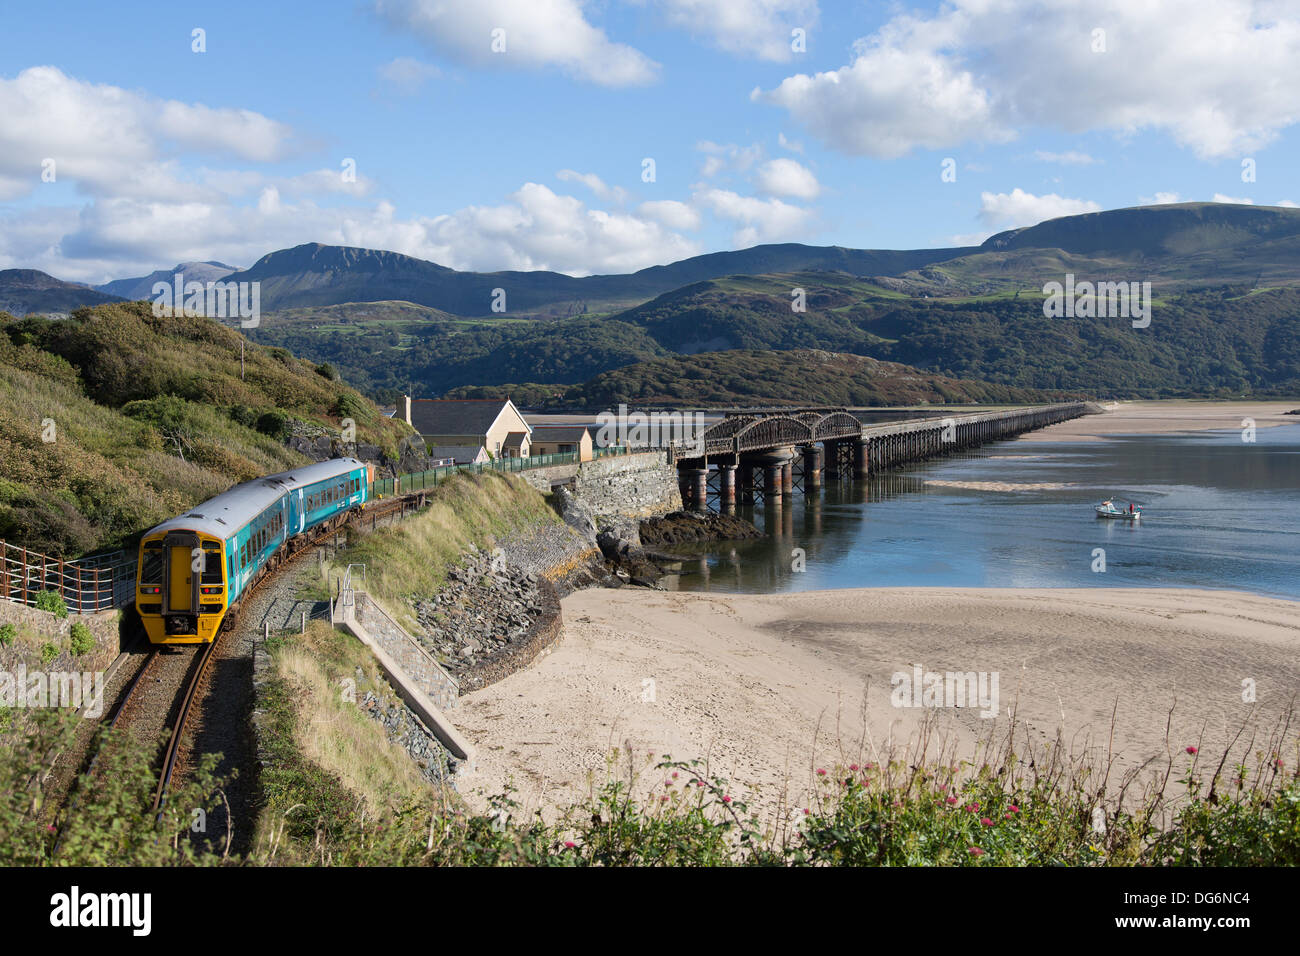 Barmouth, Wales, UK, 15 October 2013.  Bright sunshine, clear skies and a temperature of around 17 degrees made for a beautiful end-of-season day. A train on the Cambrian Coast line crosses the Barmouth Bridge, Credit:  atgof.co/Alamy Live News Stock Photo